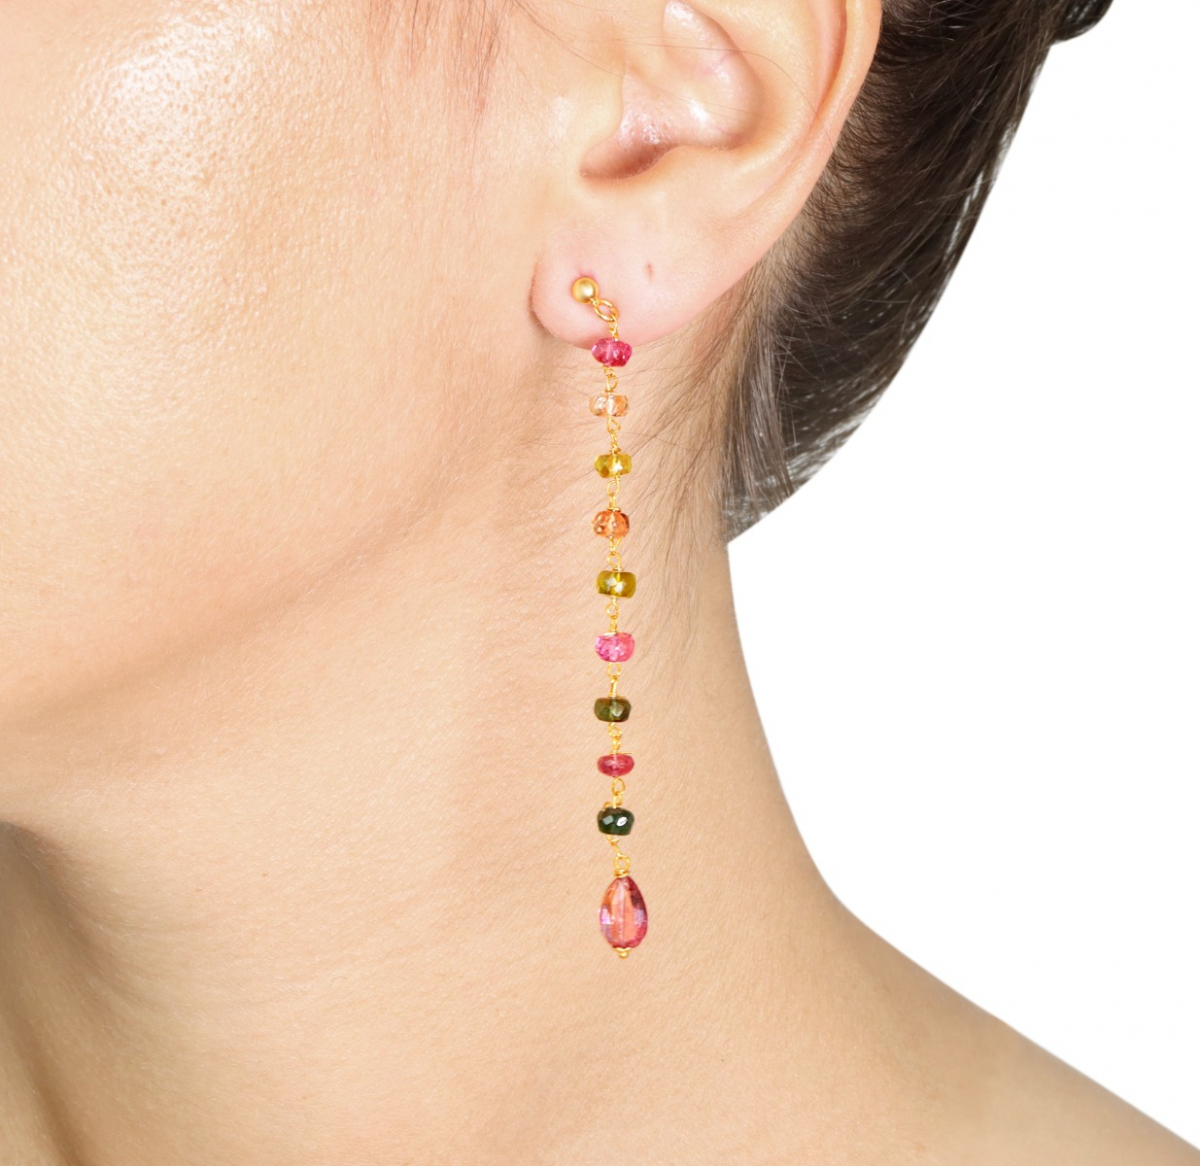 Multicolor Earrings With Final Drop And Tourmalines